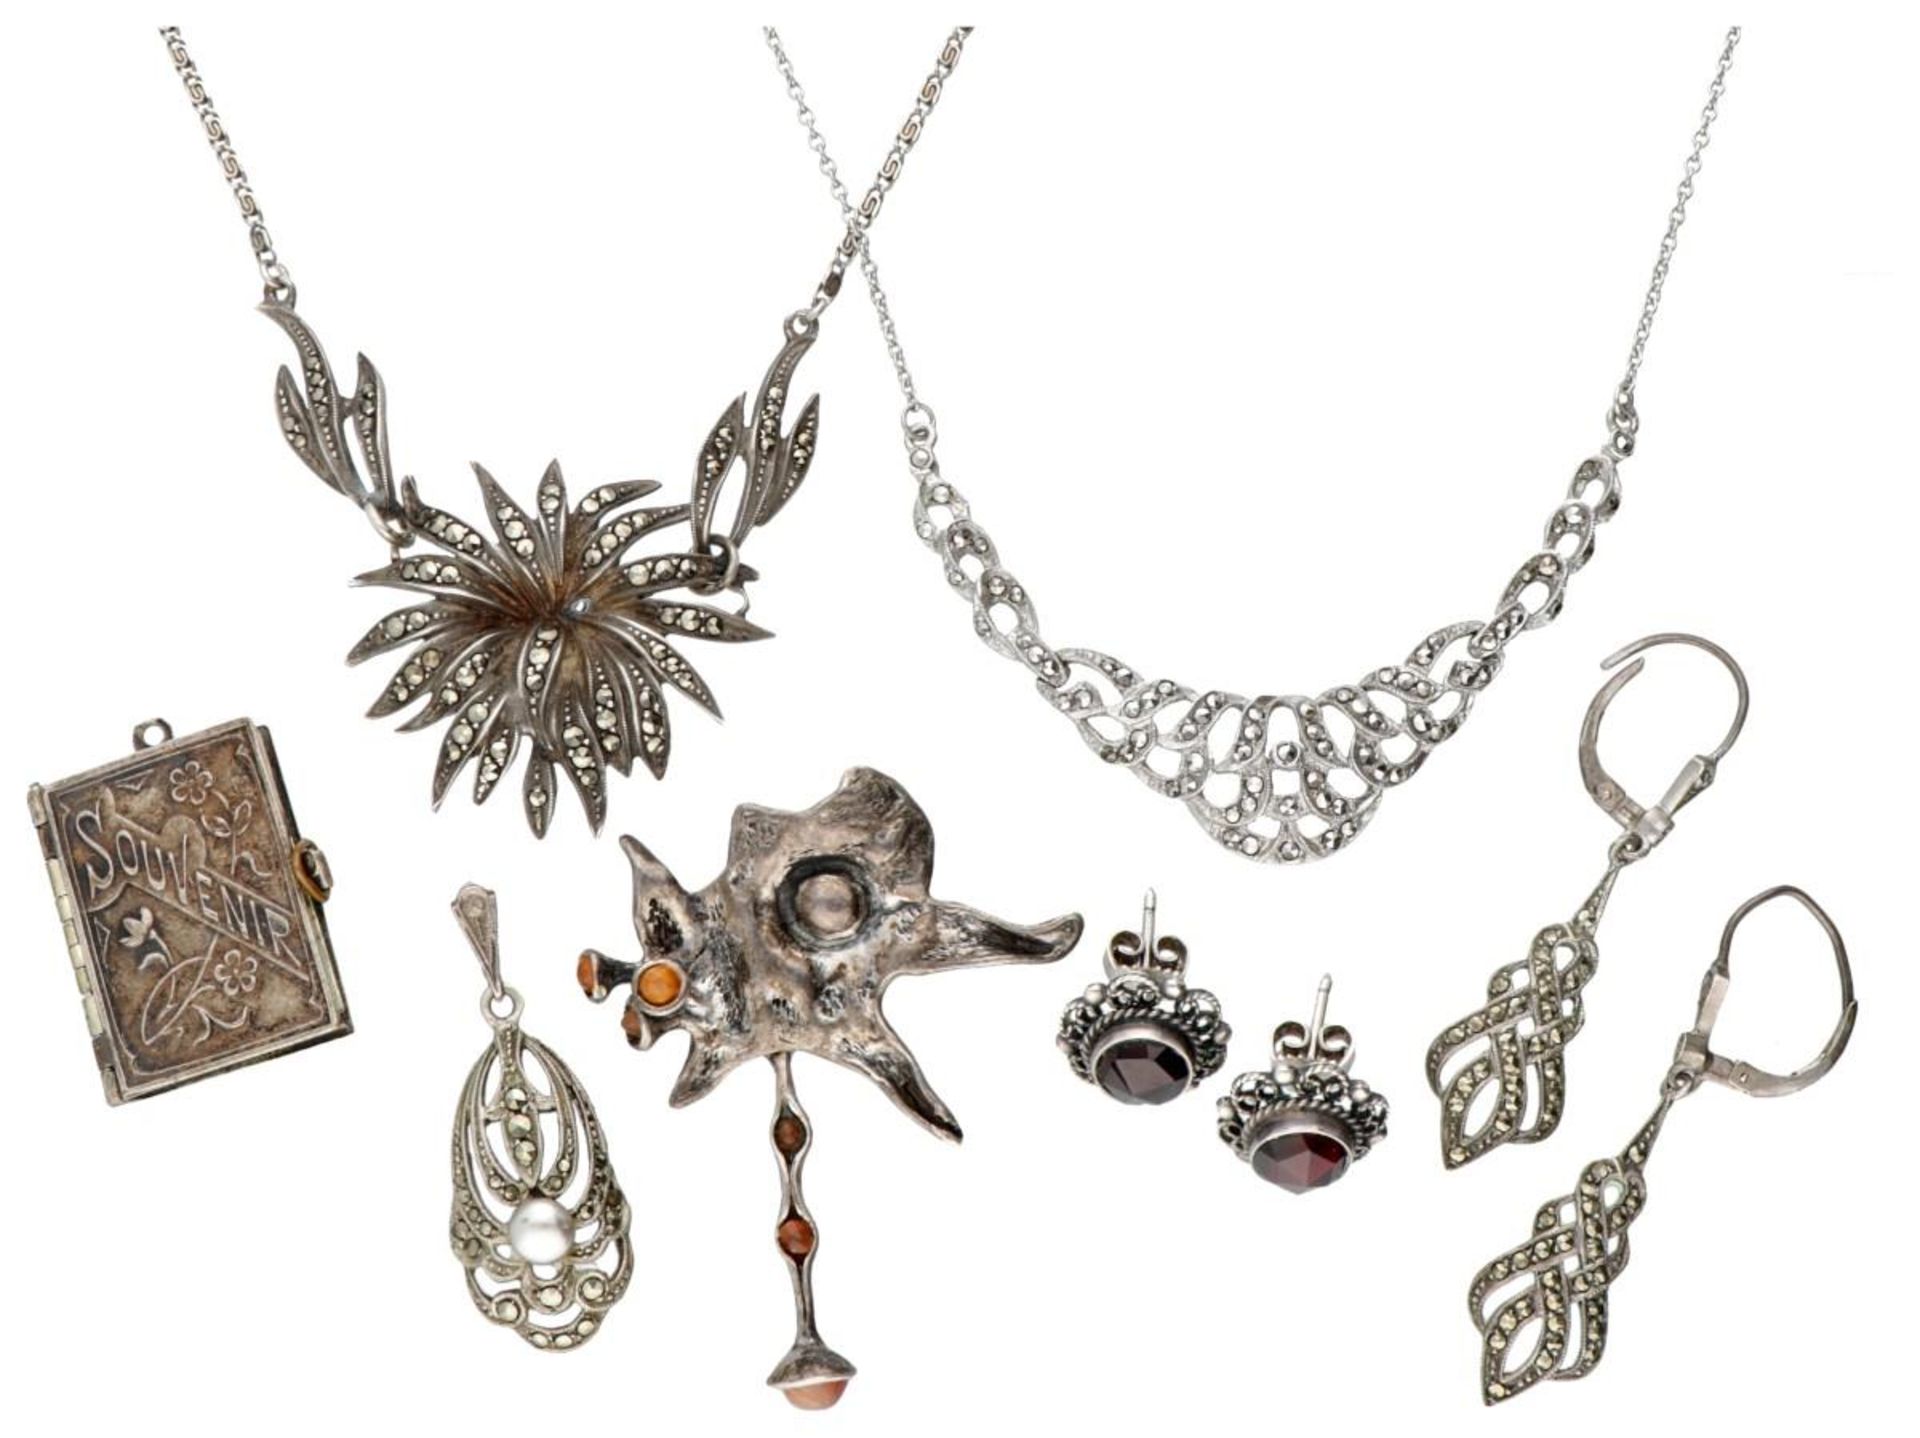 Lot with various vintage silver jewelry, set with marcasite and garnet.